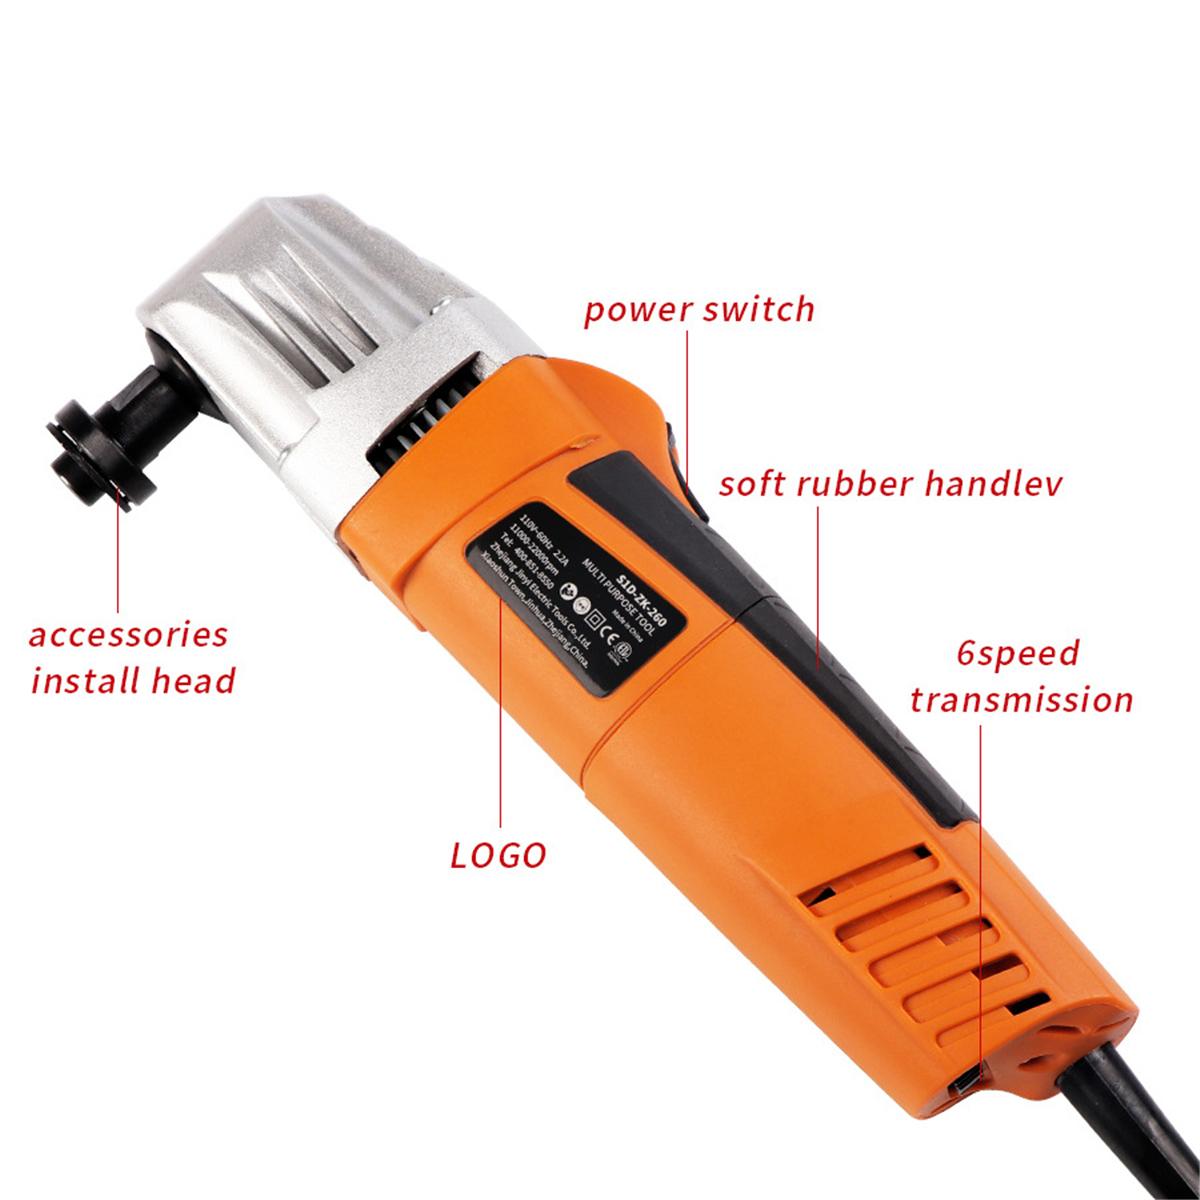 720W 110/220V Multifunction Oscillating Tool Electric Trimmer Saw for Wood Working Power Home DIY Wood Trimmer Multi Tool